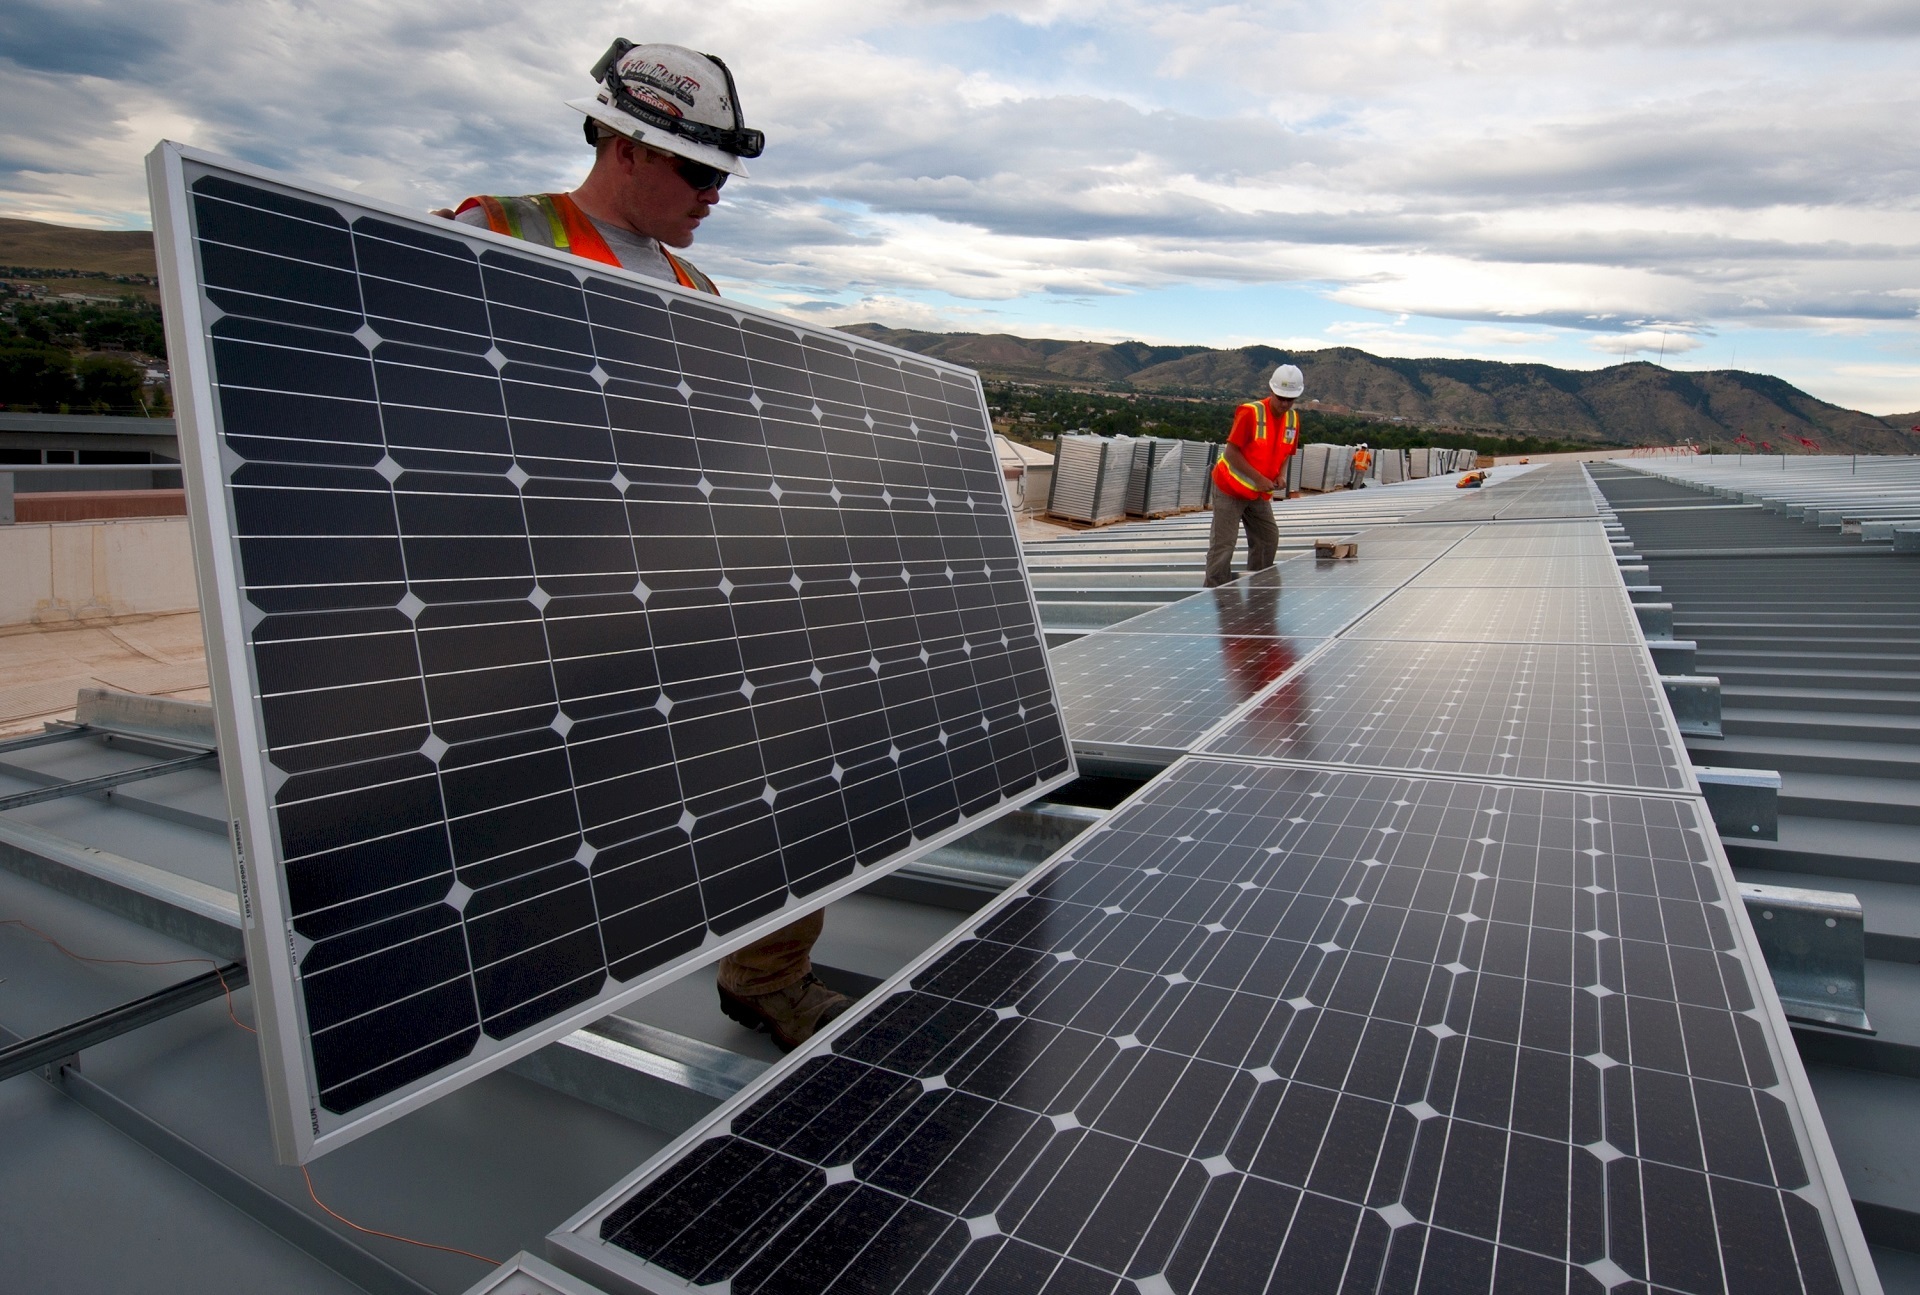 solar panels Renewable energy projects – escalating quickly to create huge marketplace